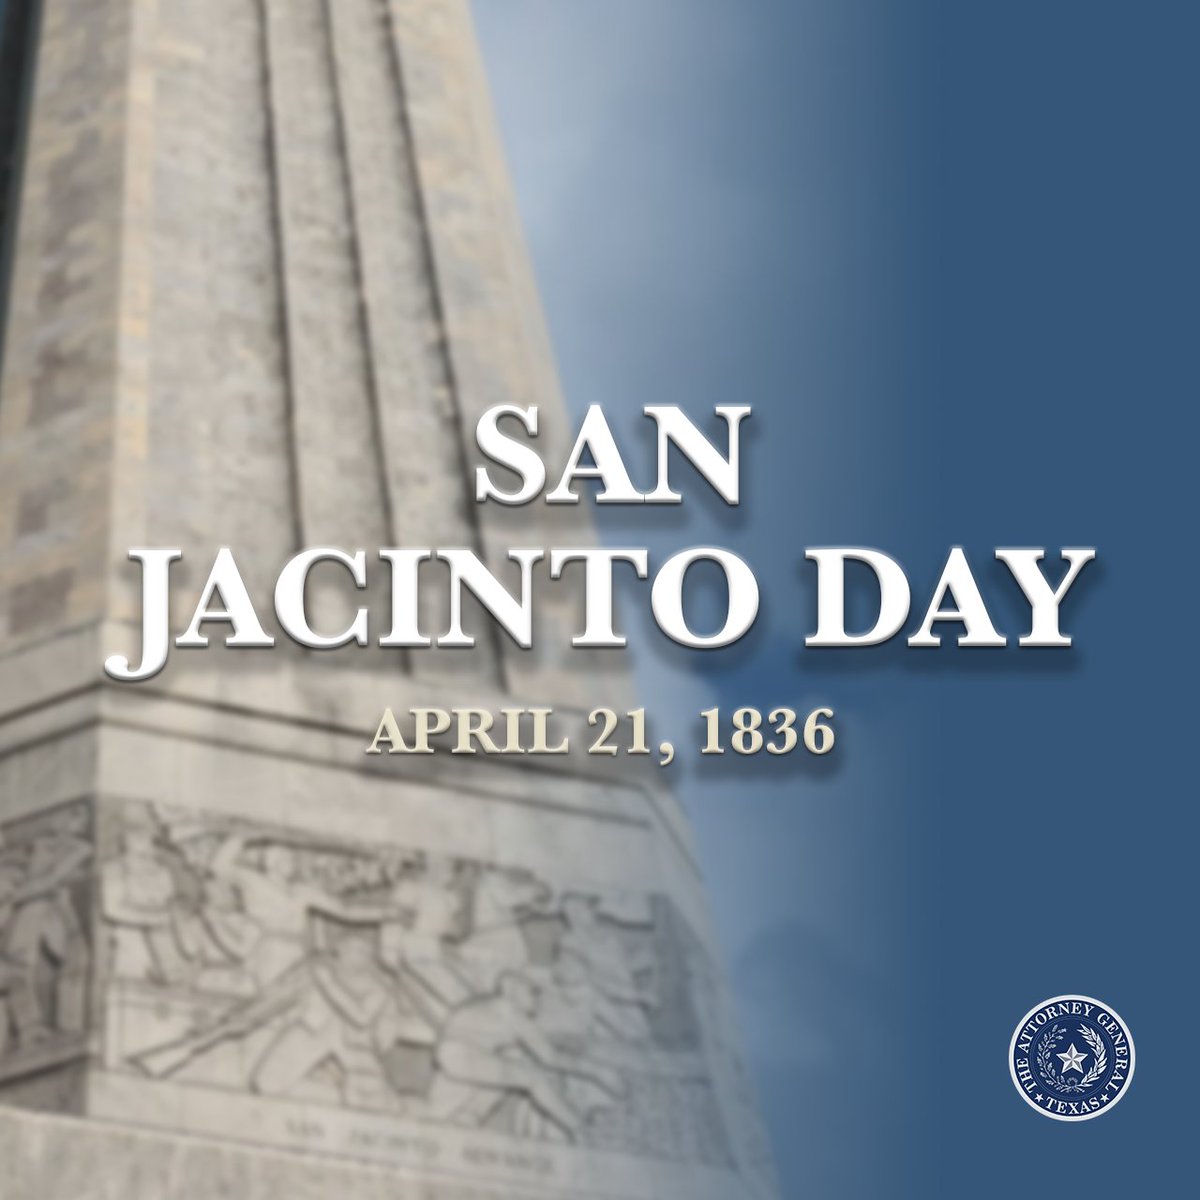 Today, we honor and celebrate those who courageously fought for Texas Independence. Happy #SanJacintoDay!